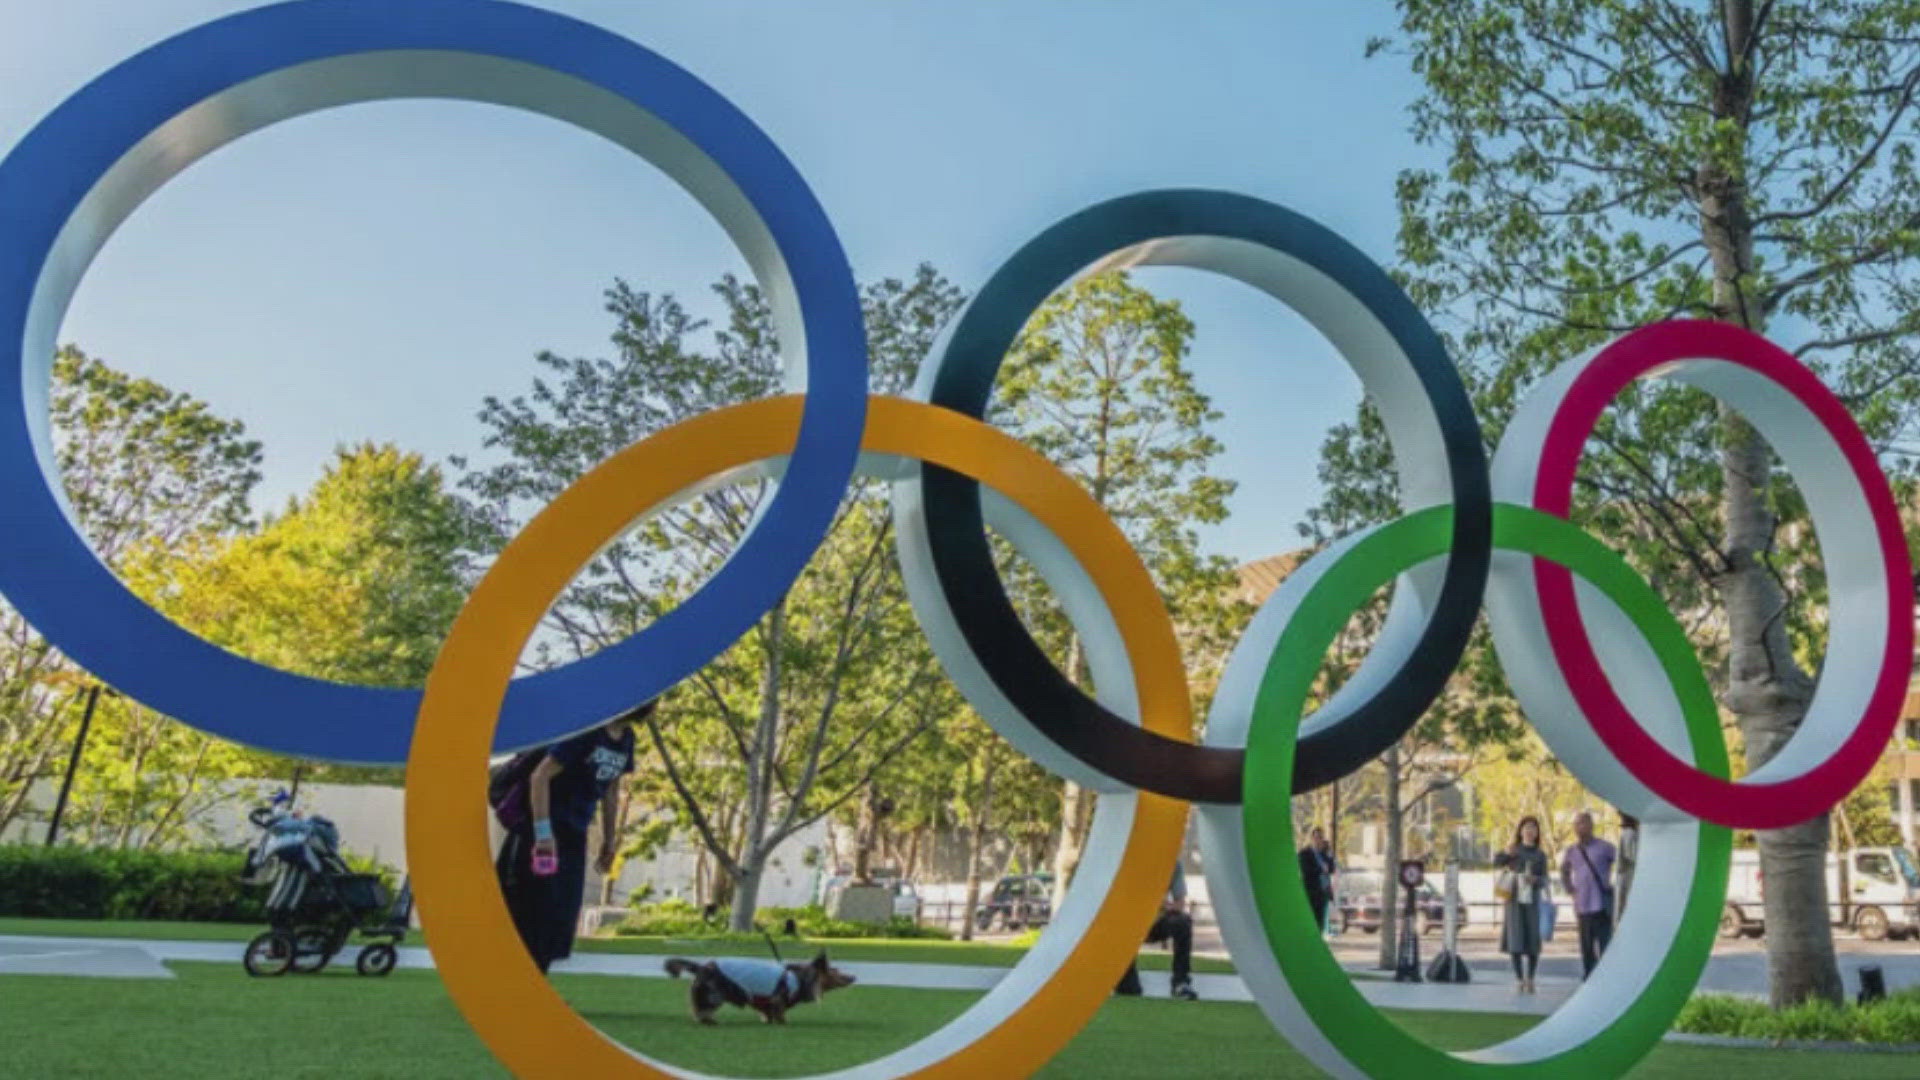 Free and open to the public, the 20-foot-long display of the Olympic Rings will be in Market Square on Wednesday, June 19, from 10 a.m. to 7 p.m.